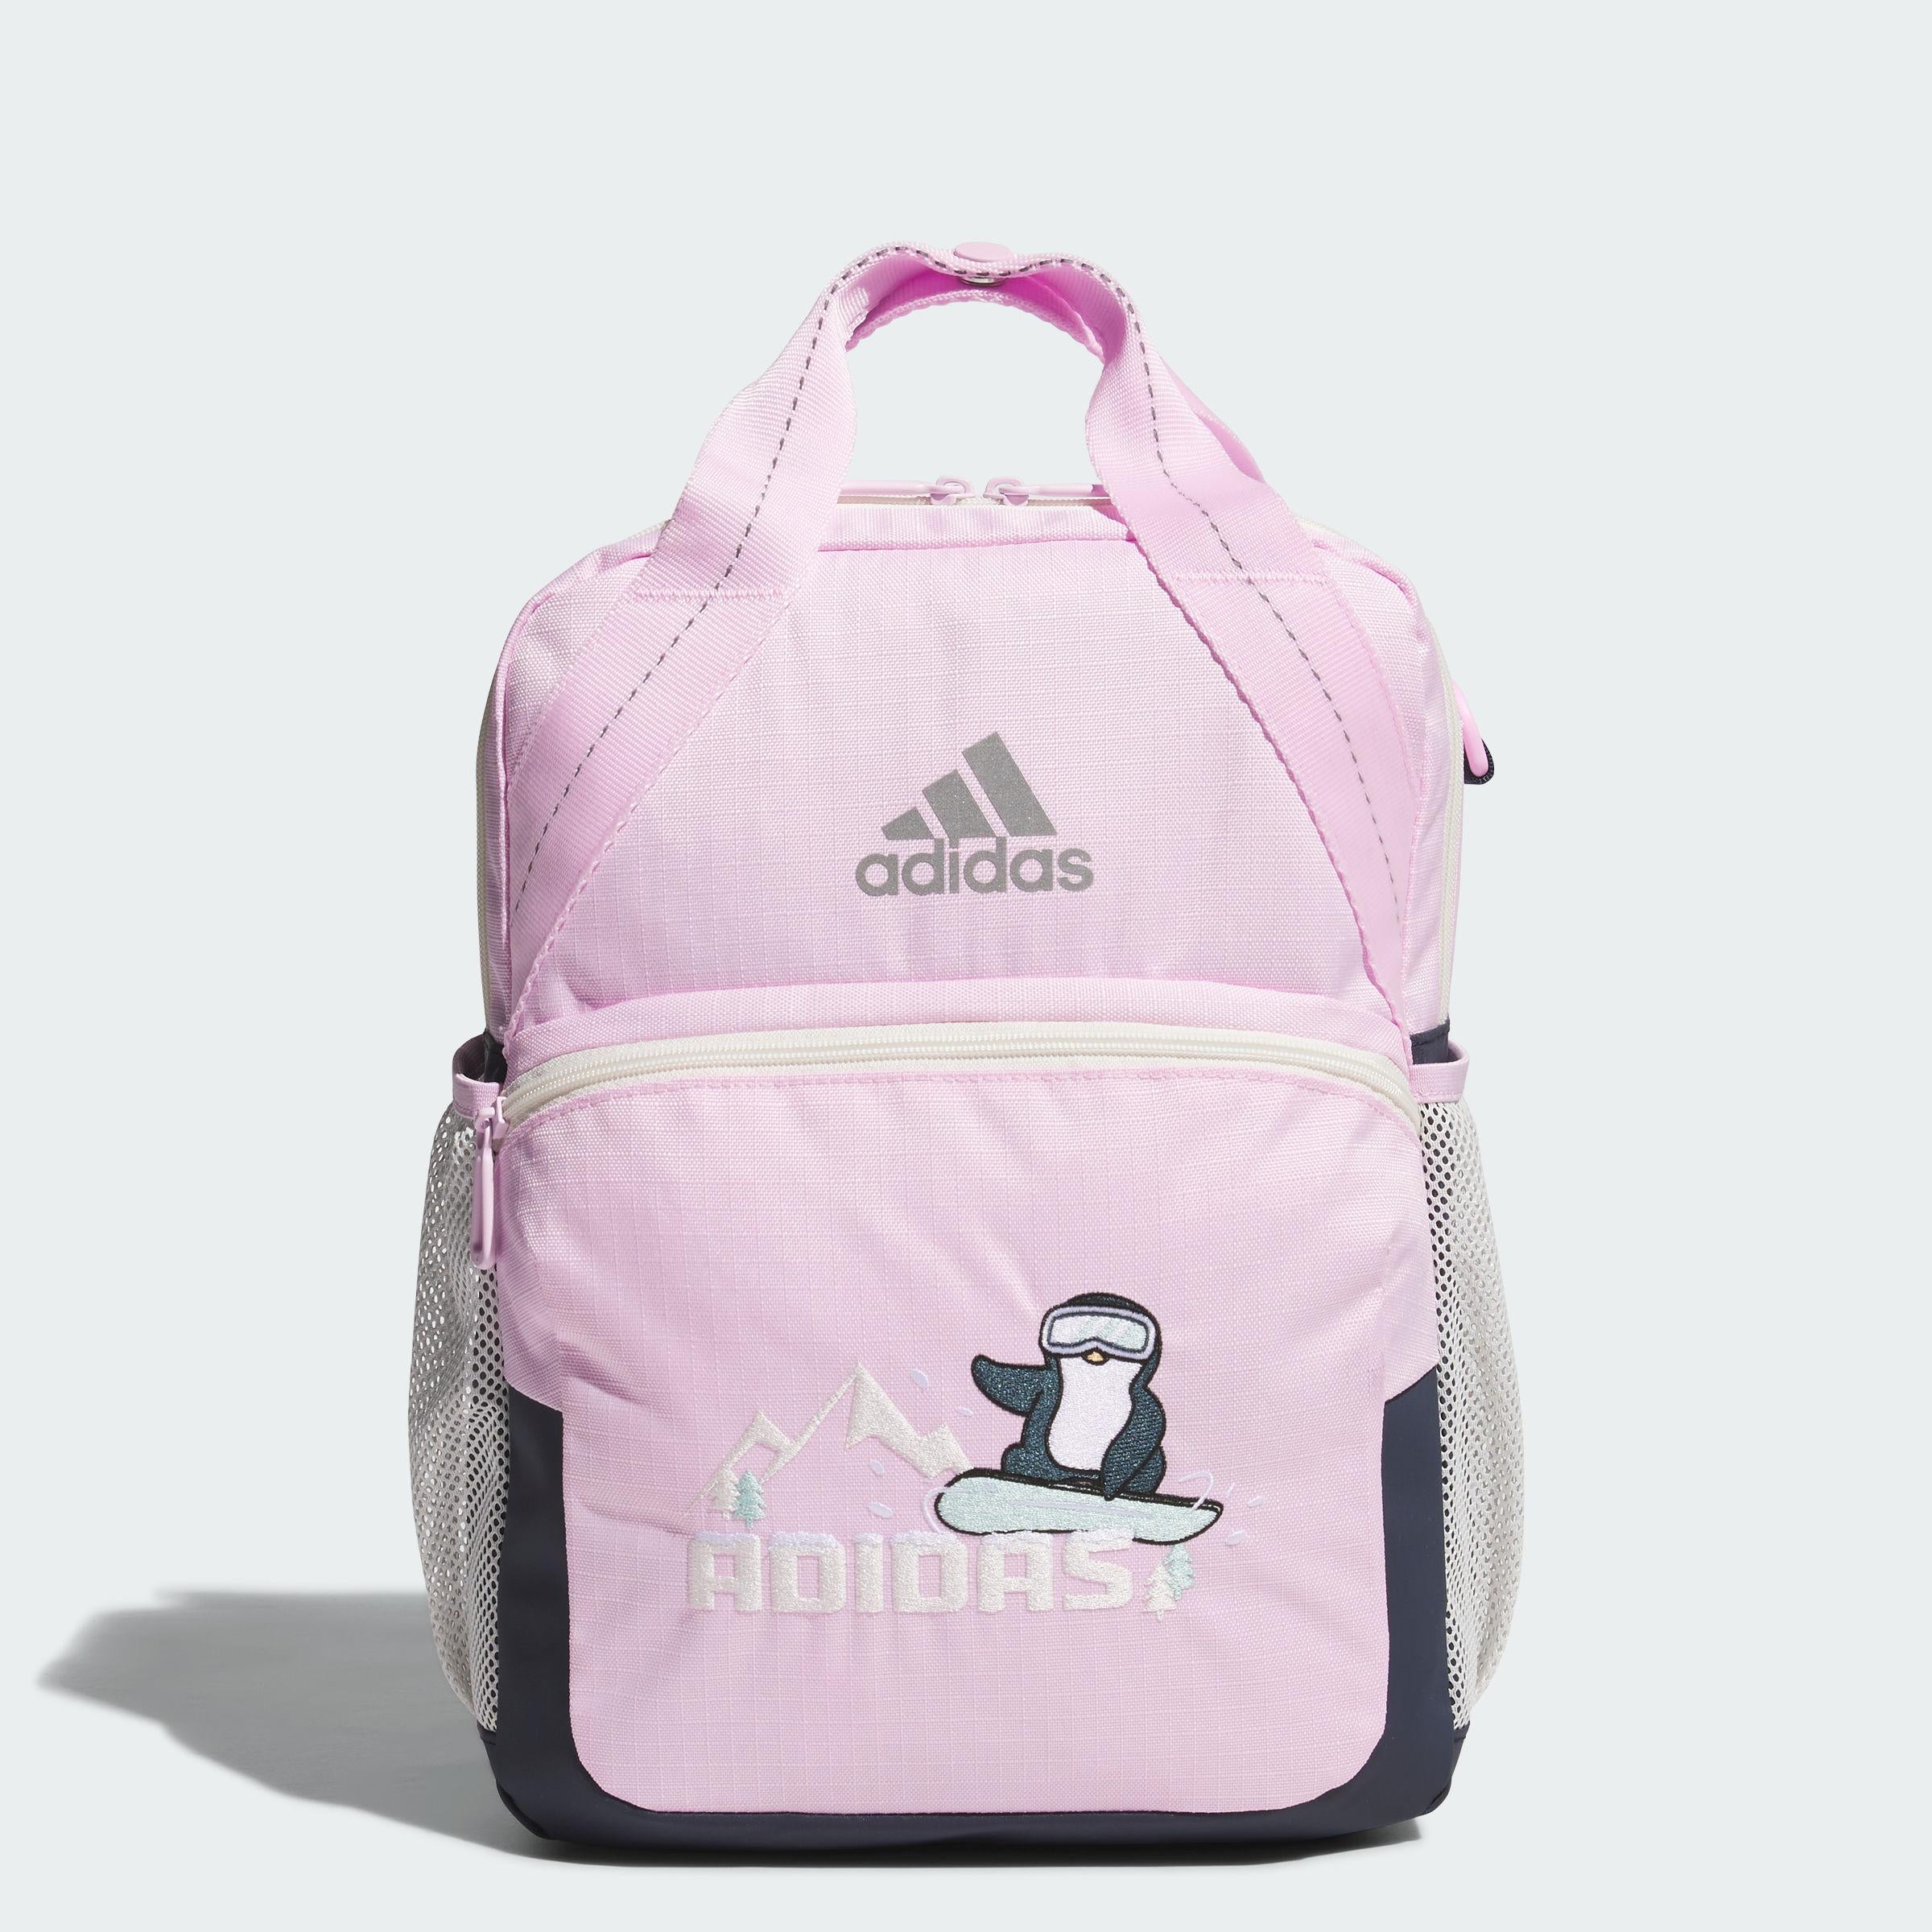  ACC, Adidas, bag, TRAINING, open for kids